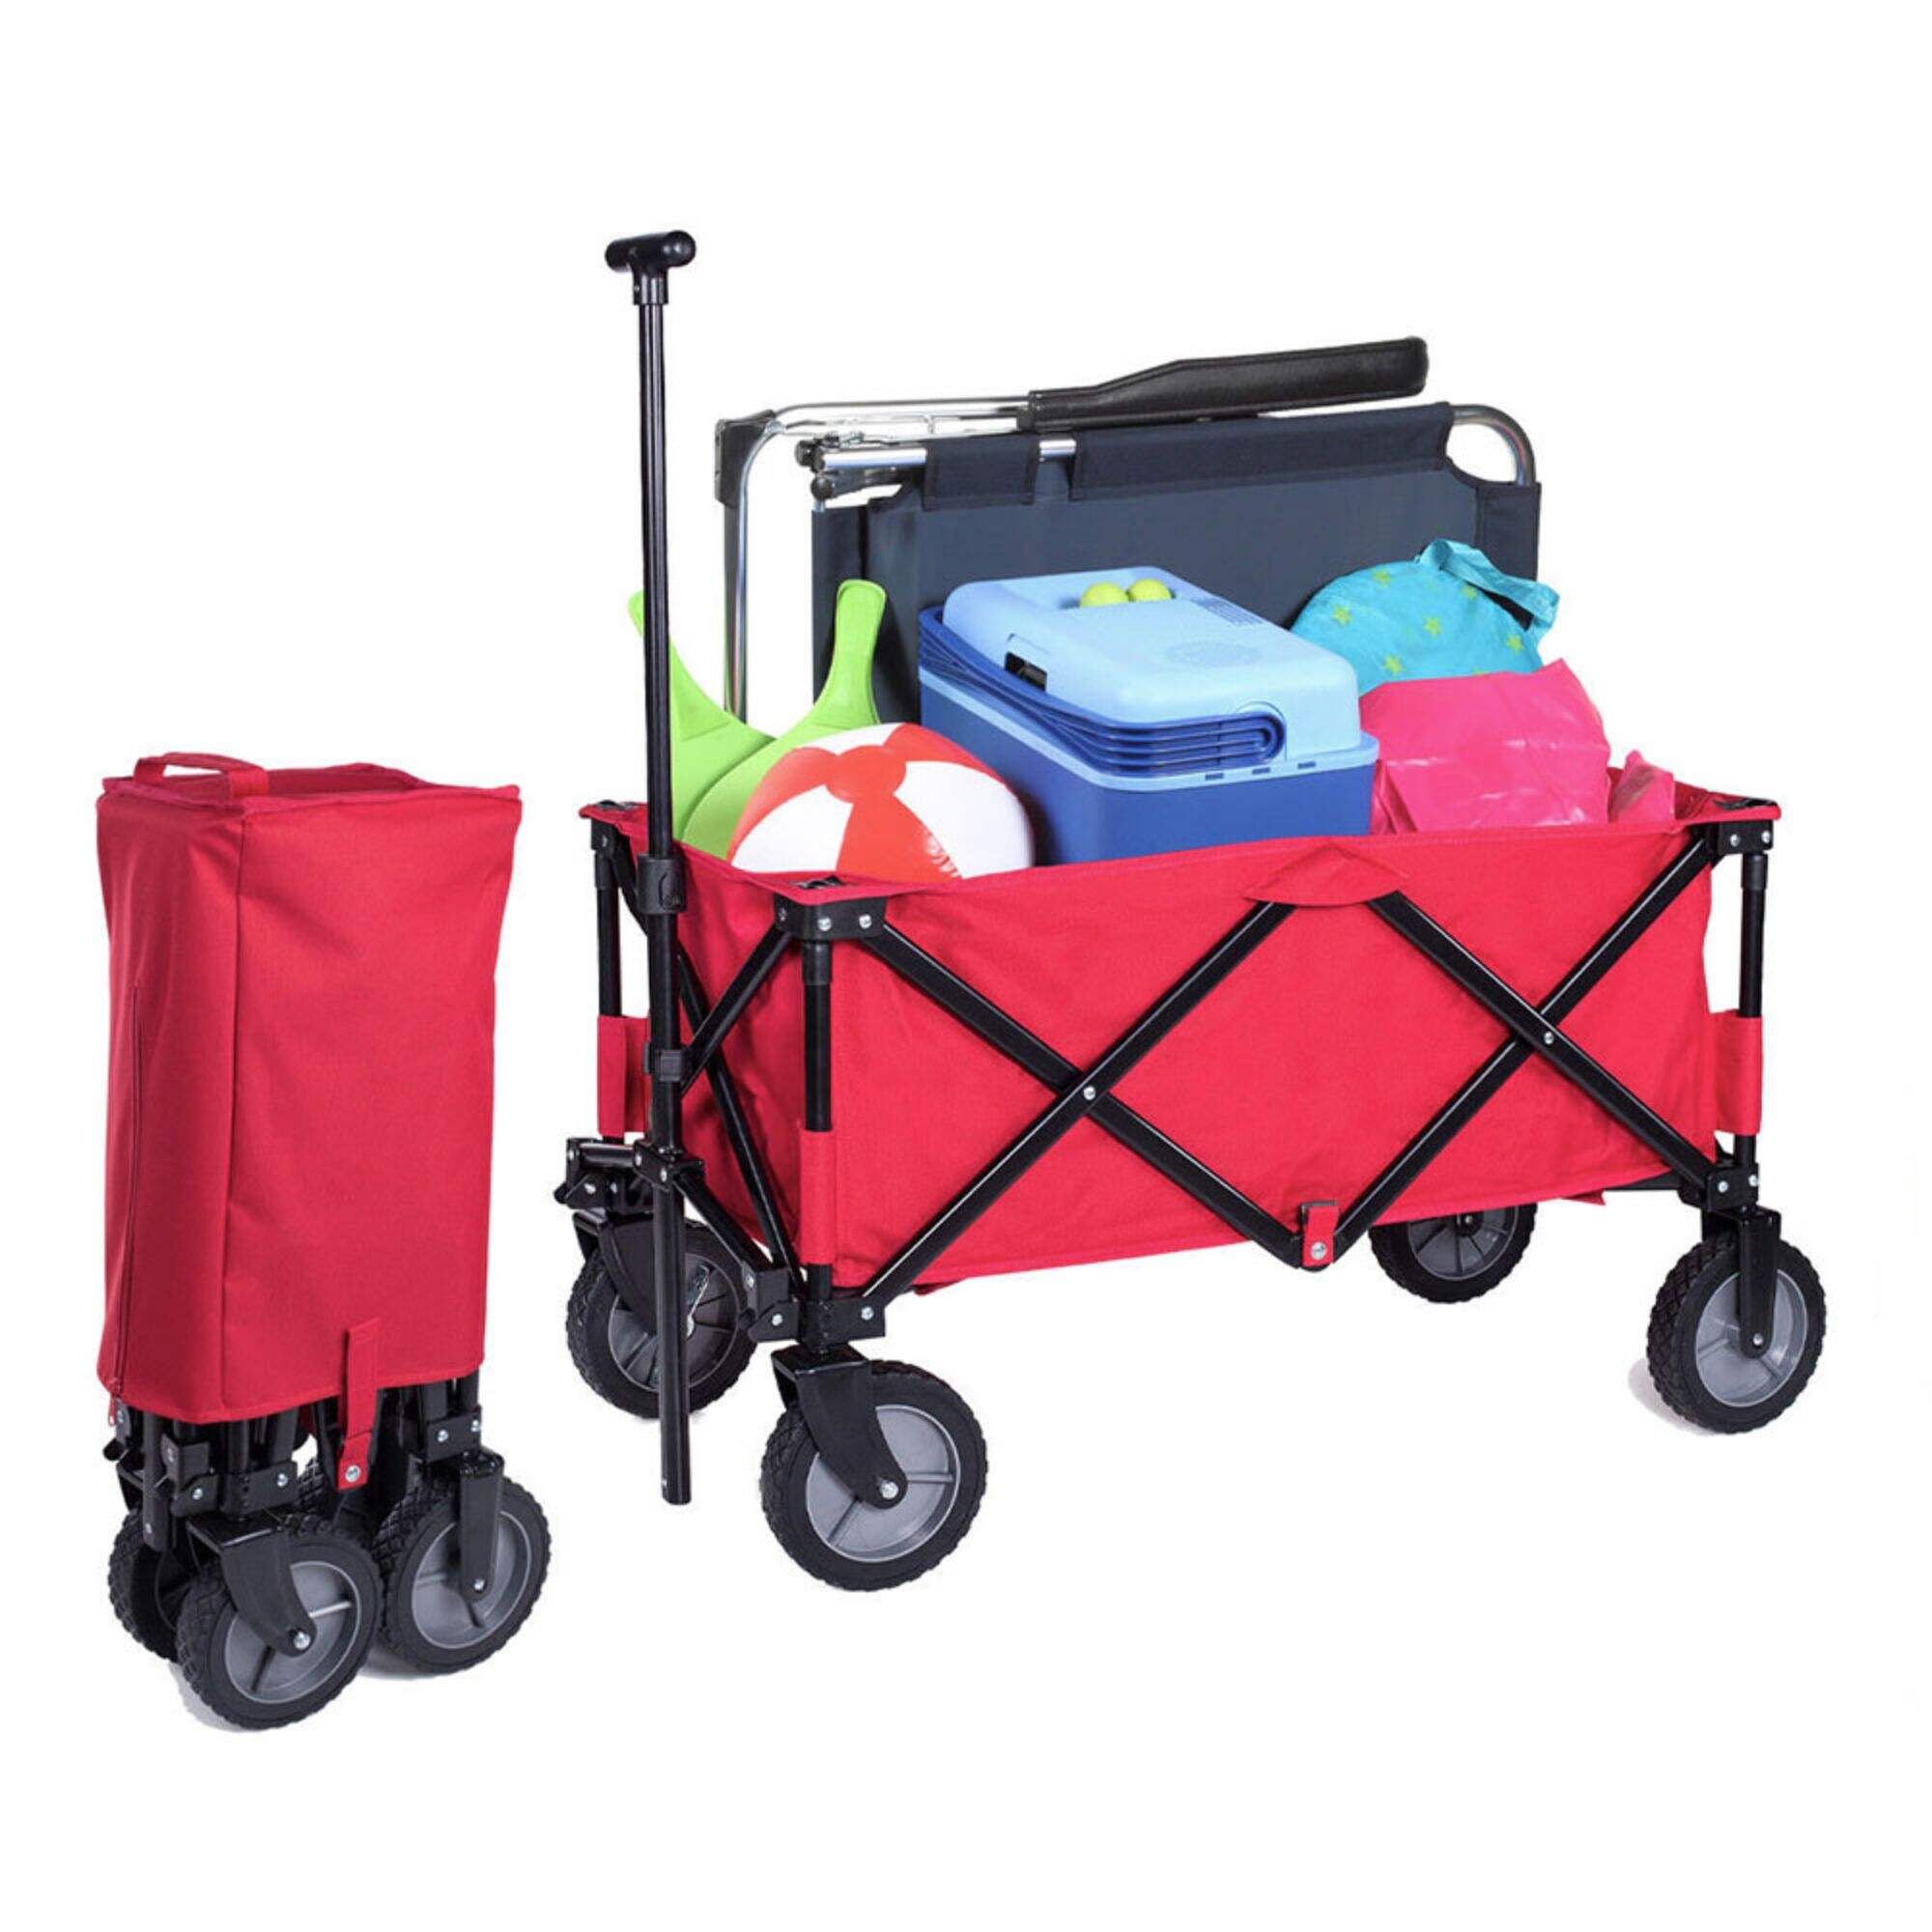 GT1805 Collapsible Folding Wagon, Utility Grocery Wagon, for Camping Garden Sports